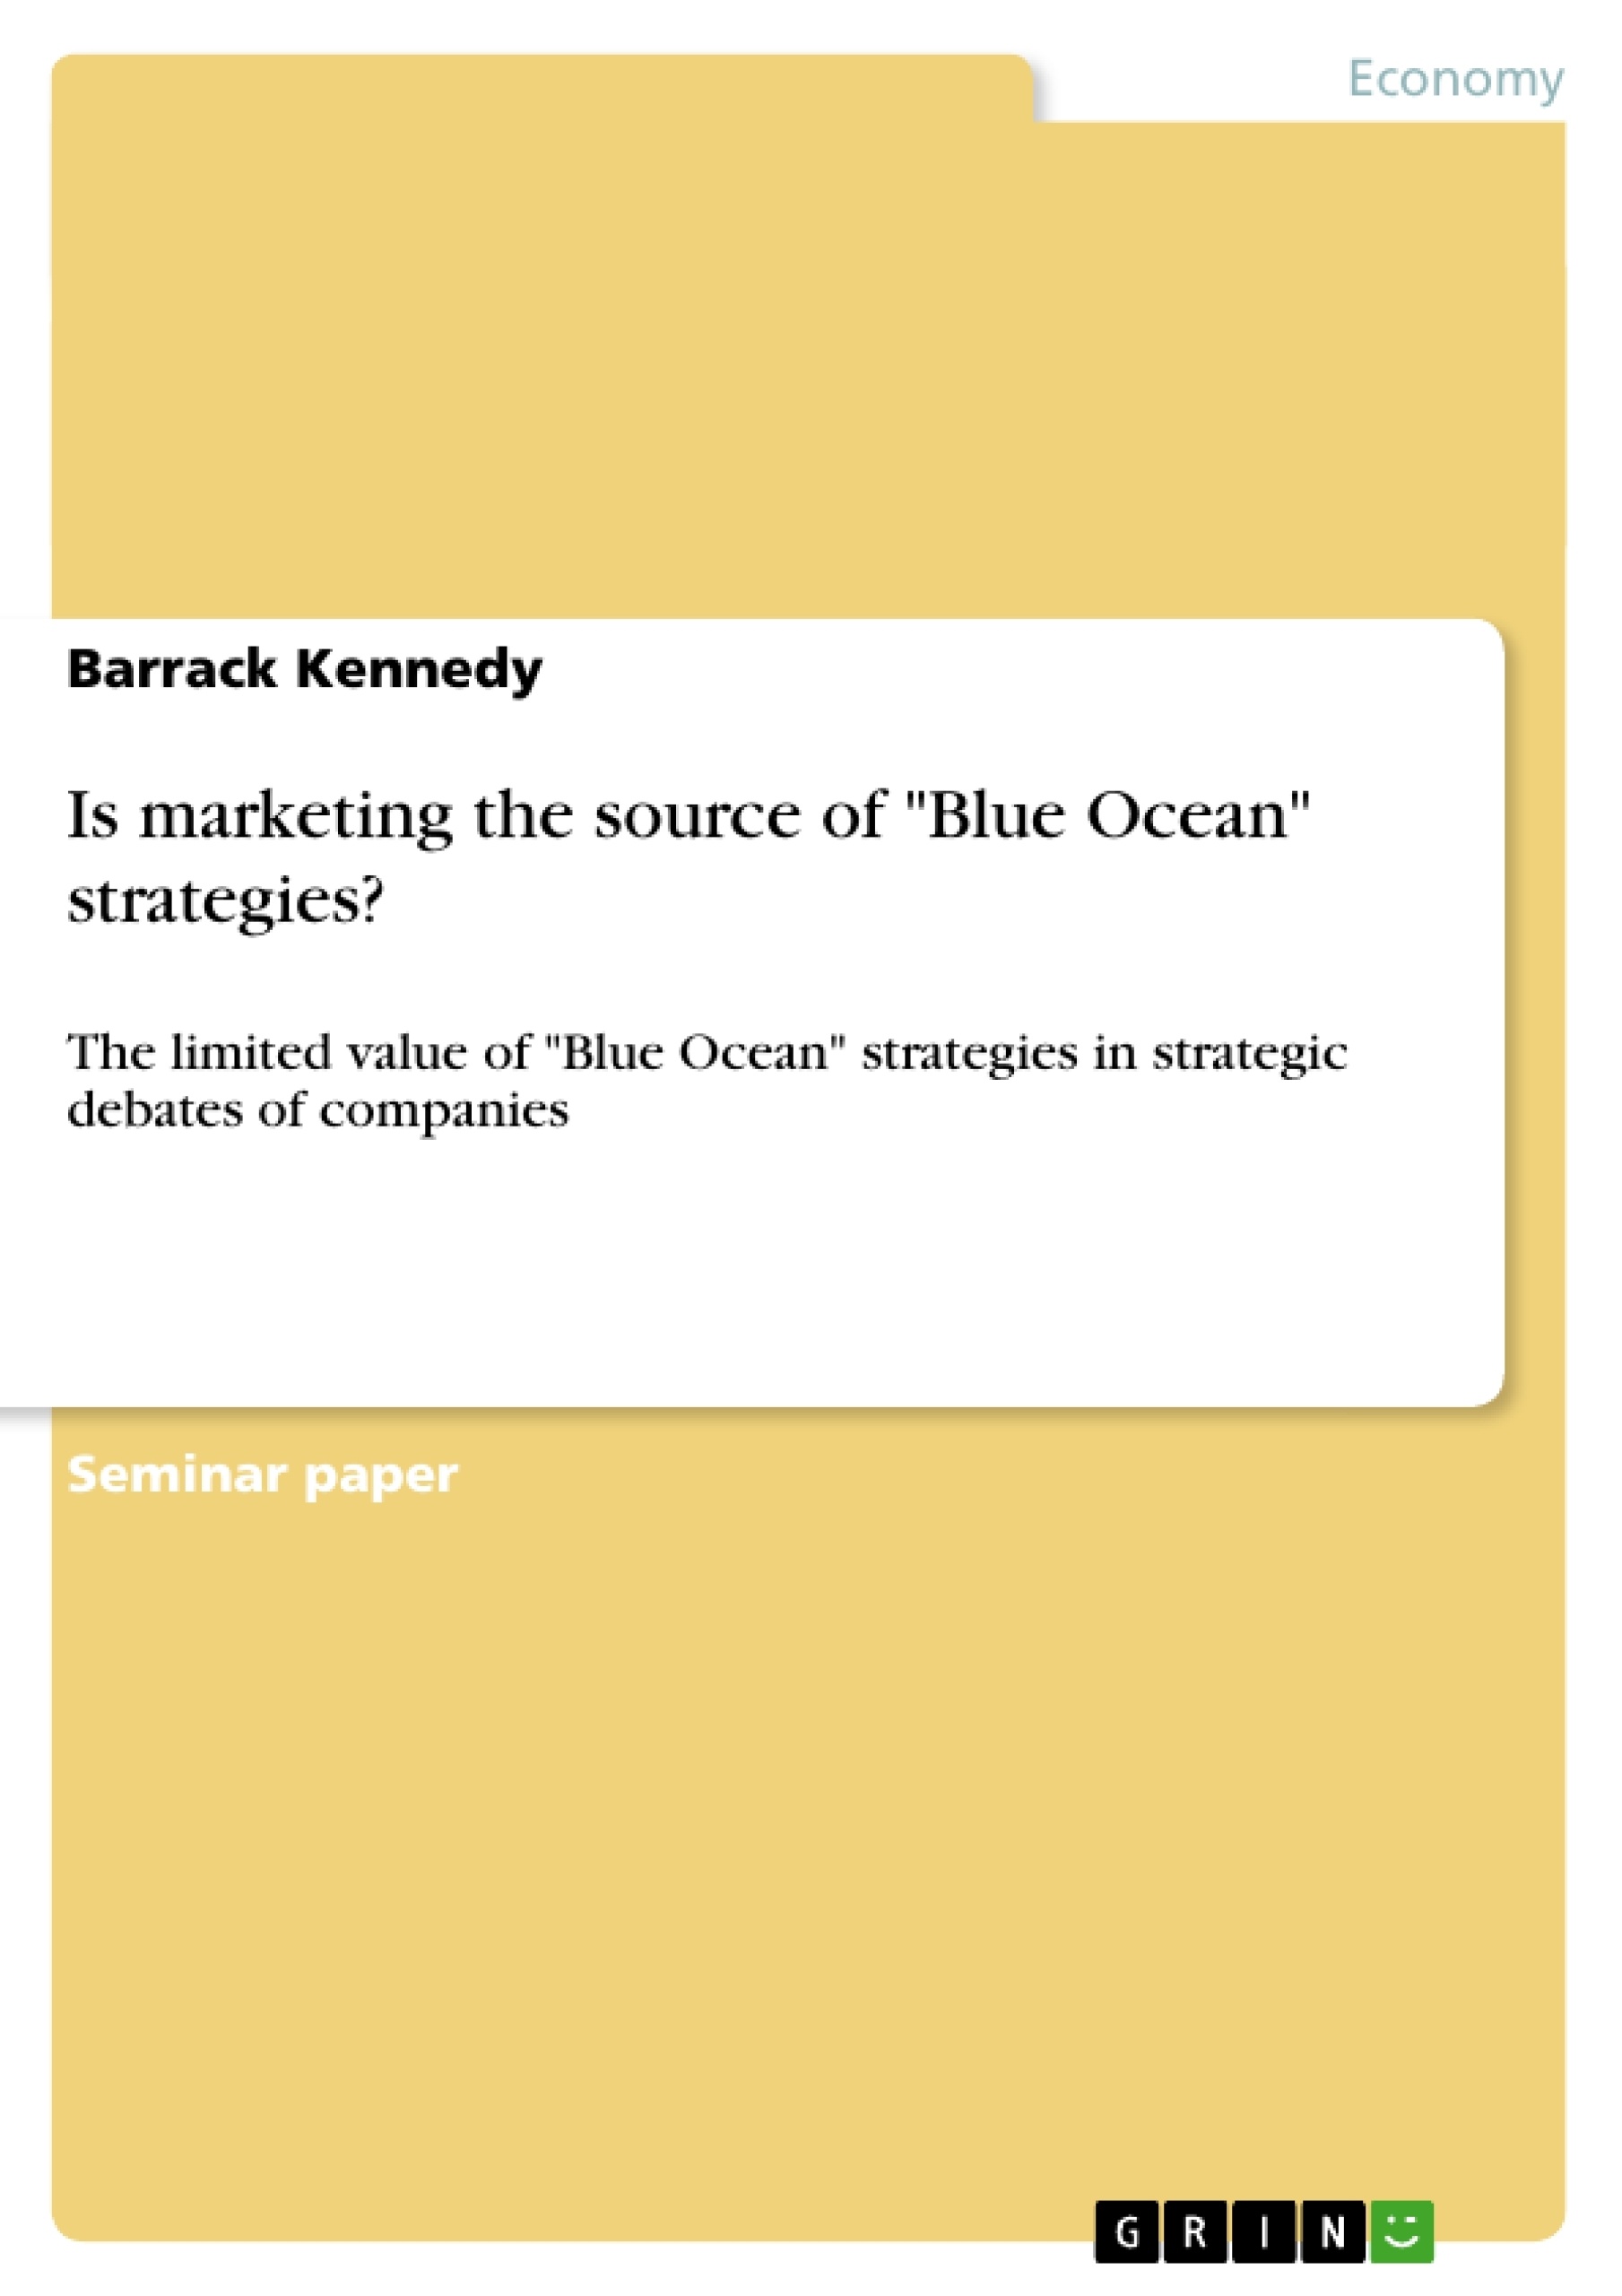 Title: Is marketing the source of "Blue Ocean" strategies?